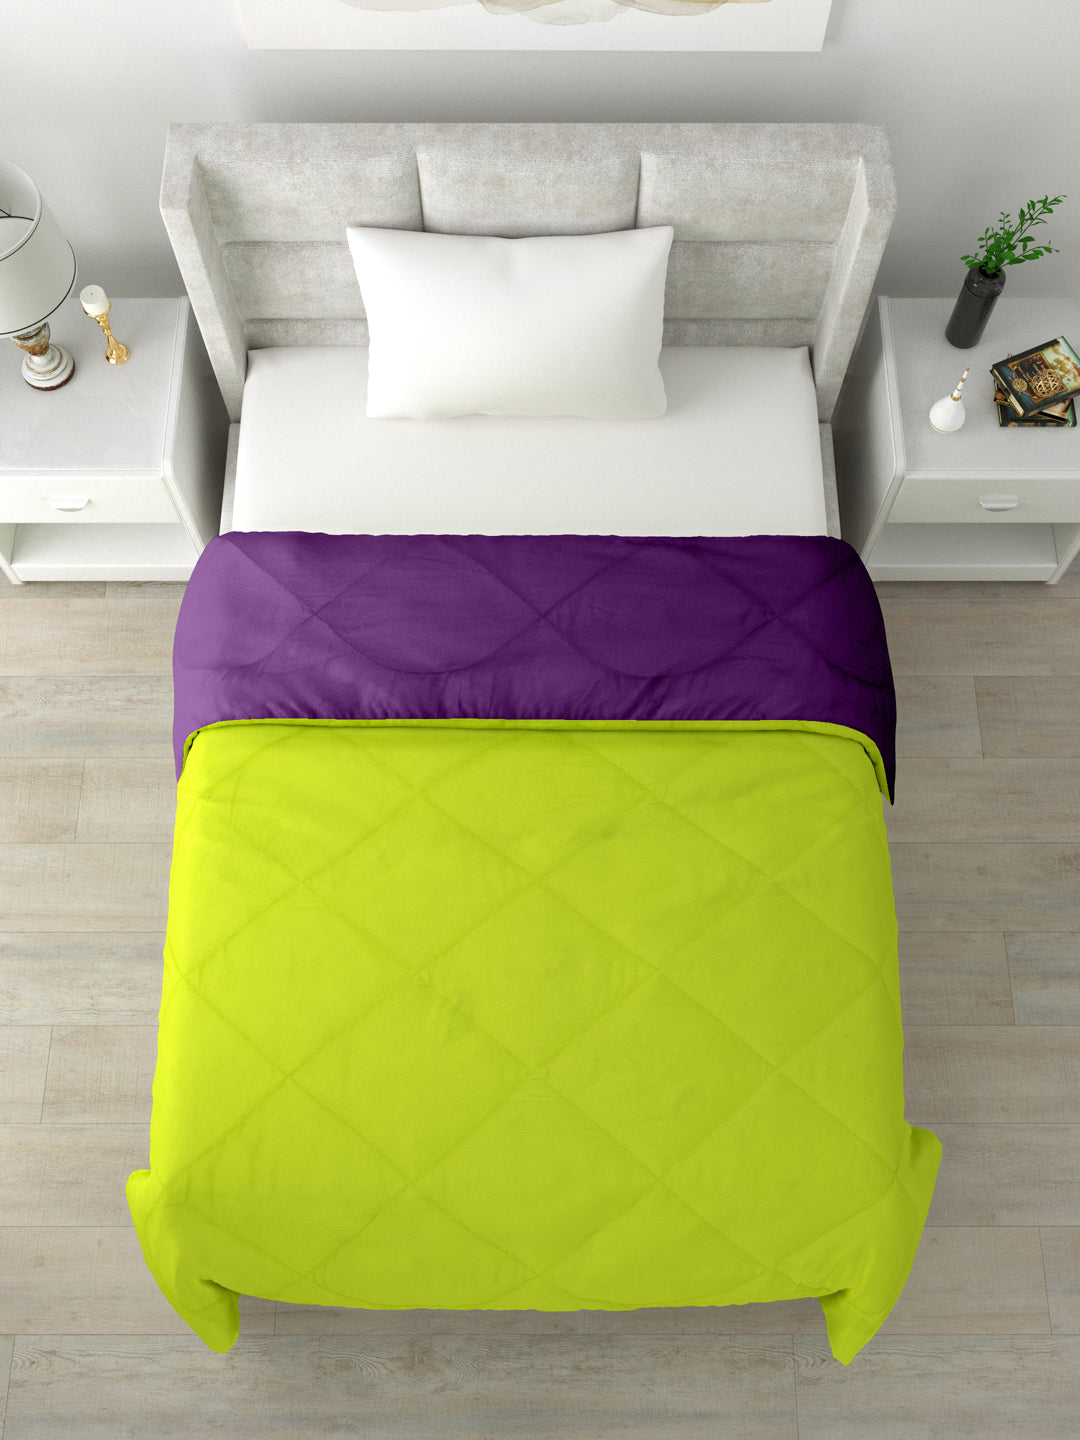 Reversible Single Bed Comforter 200 GSM 60x90 Inches (Green & Purple)